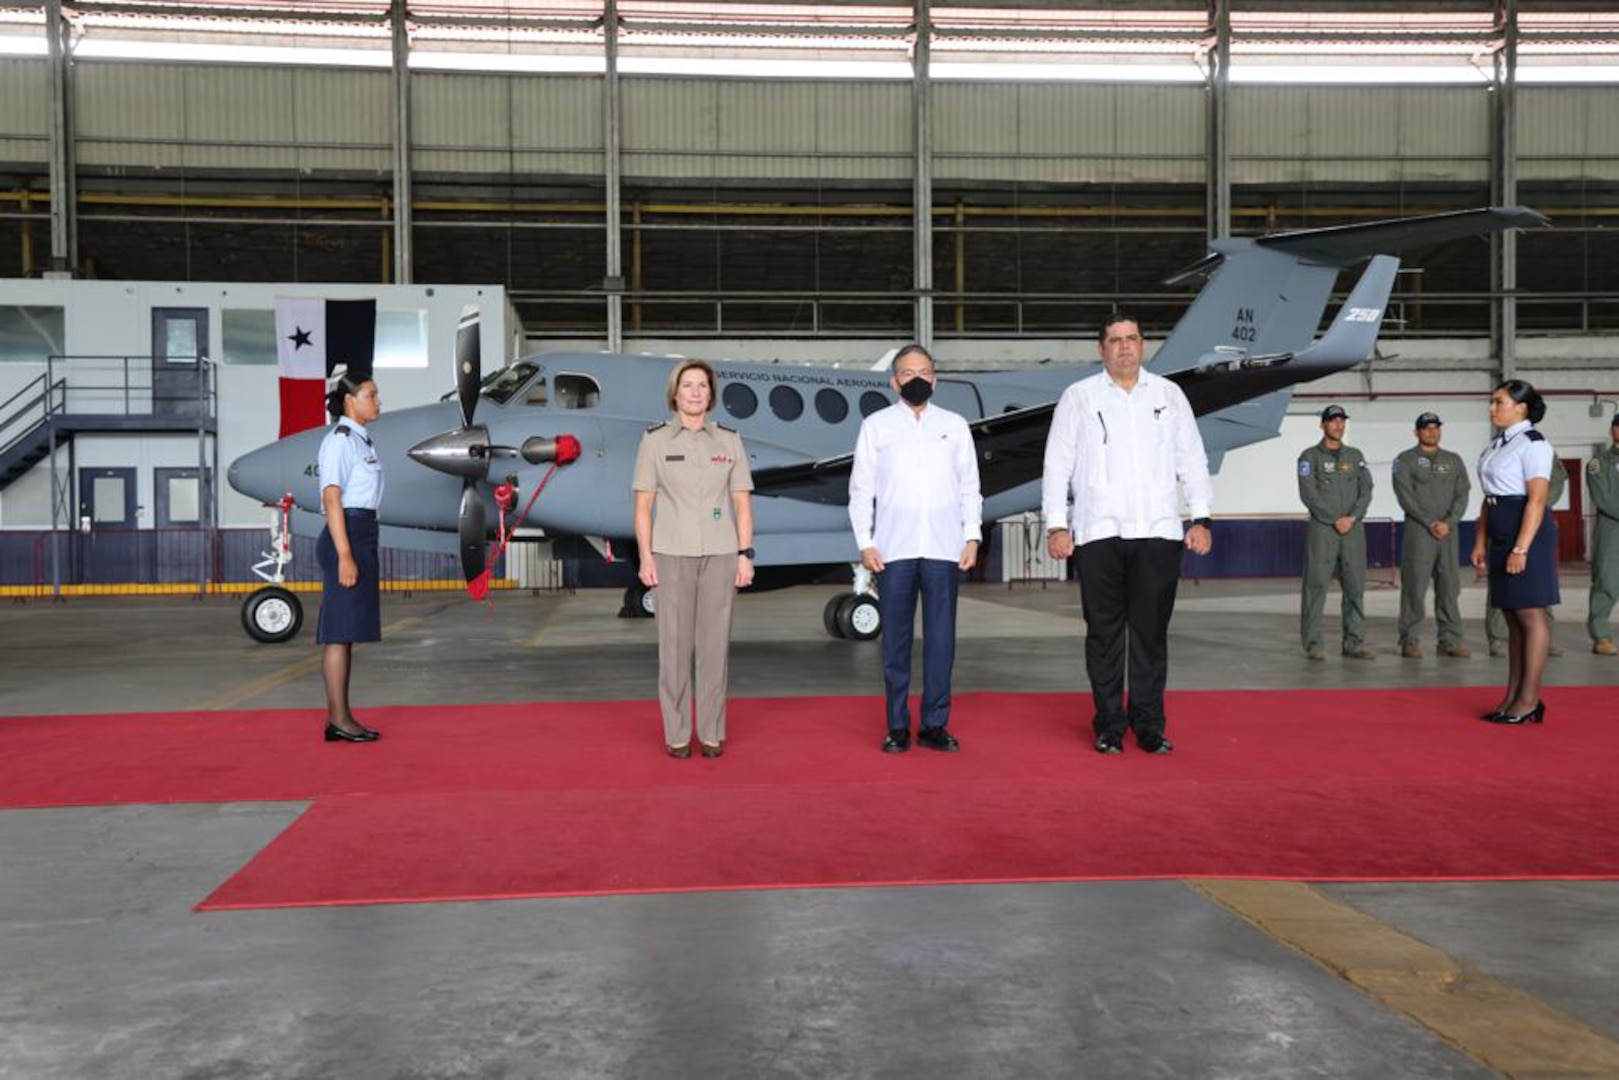 Army Gen. Laura Richardson joins Panamanian President Laurentino Cortizo and Minister of Public Security Juan Pino for a ceremony as the United States donated a King Air 250 maritime patrol aircraft to Panama.